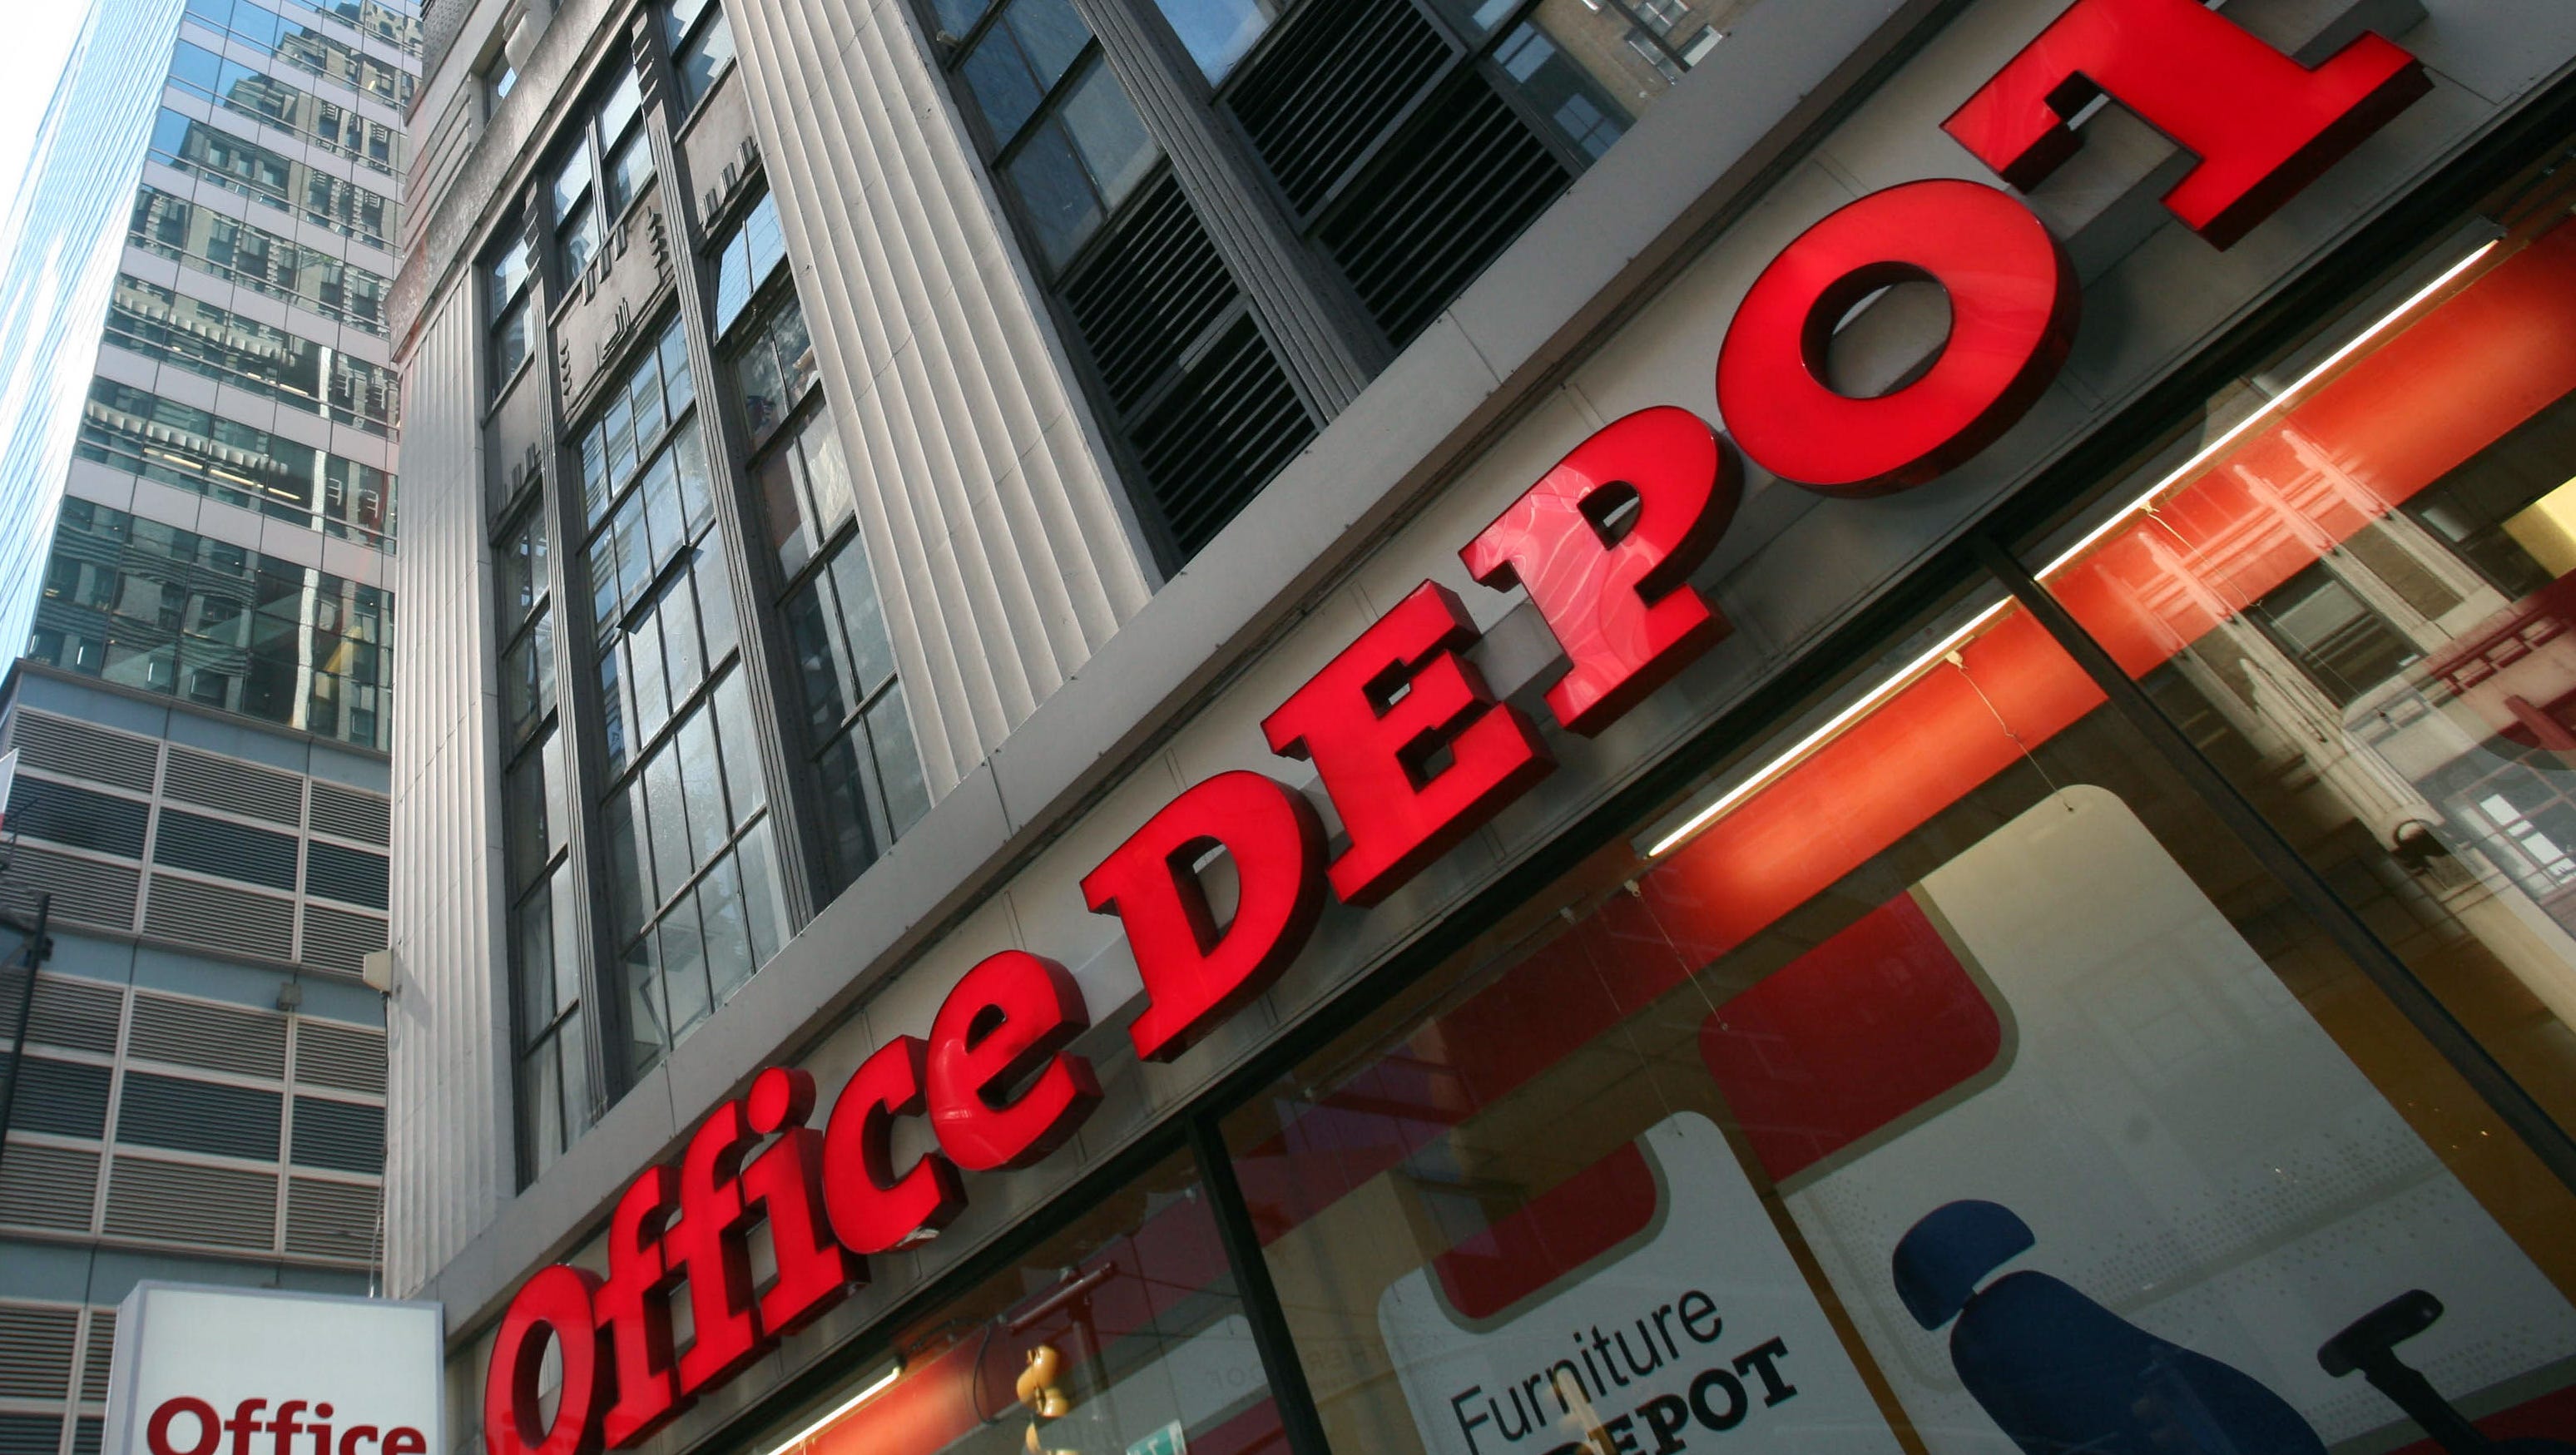 Office supply giant Office Depot rolls out same-day delivery.